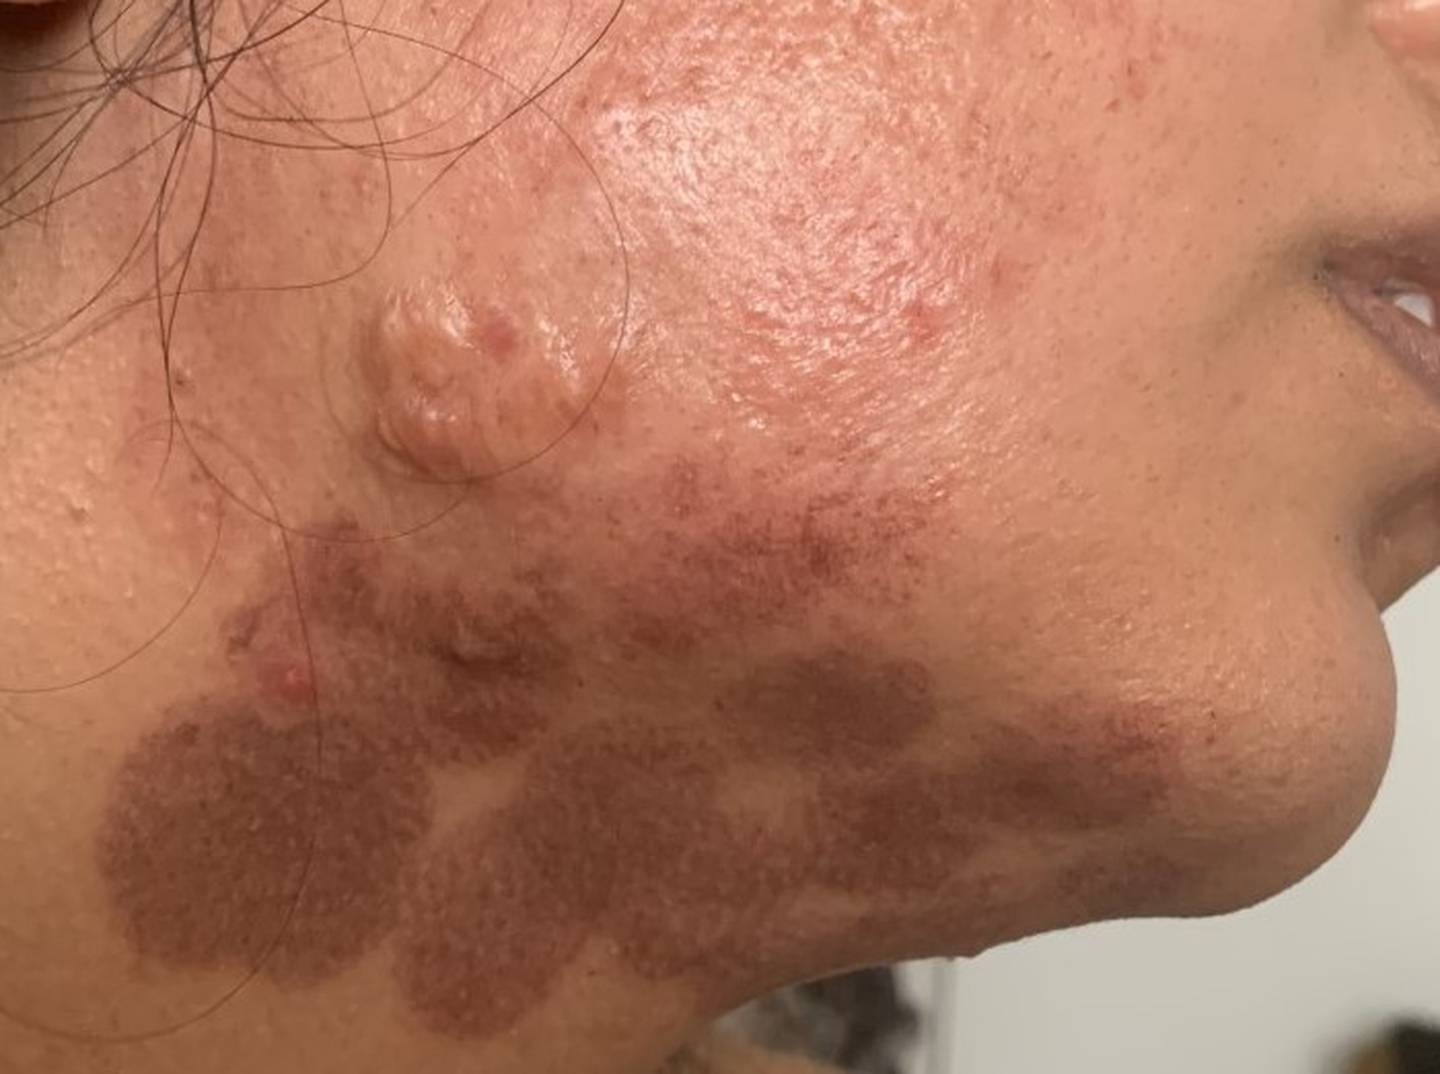 Woman's face burned after Auckland beauty therapist leaves hair removal  laser on wrong settings - NZ Herald